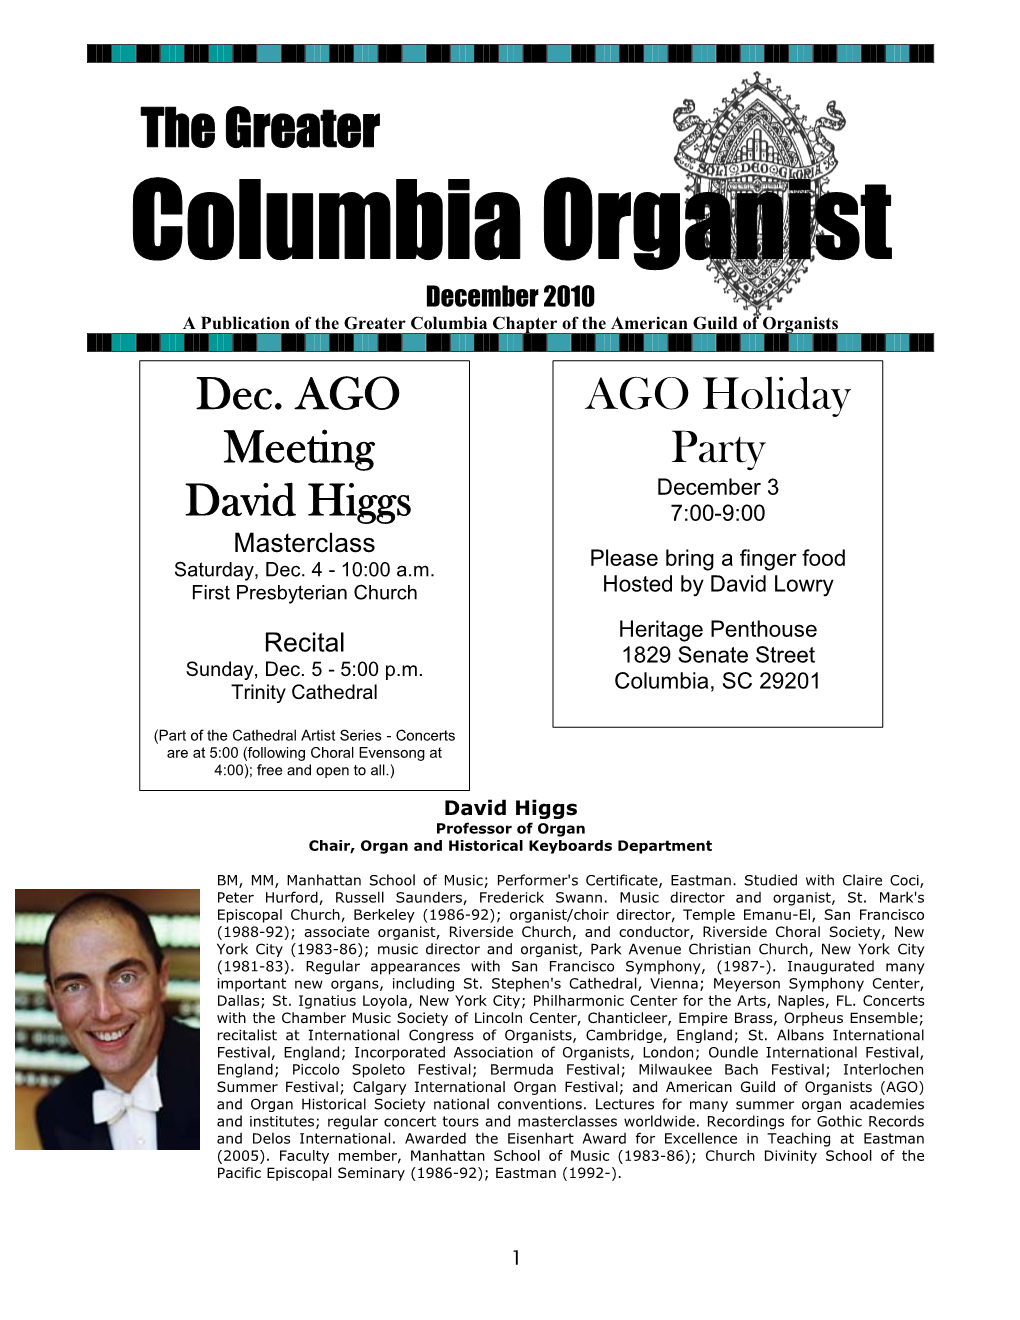 The Greater Columbia Organist December 2010 a Publication of the Greater Columbia Chapter of the American Guild of Organists